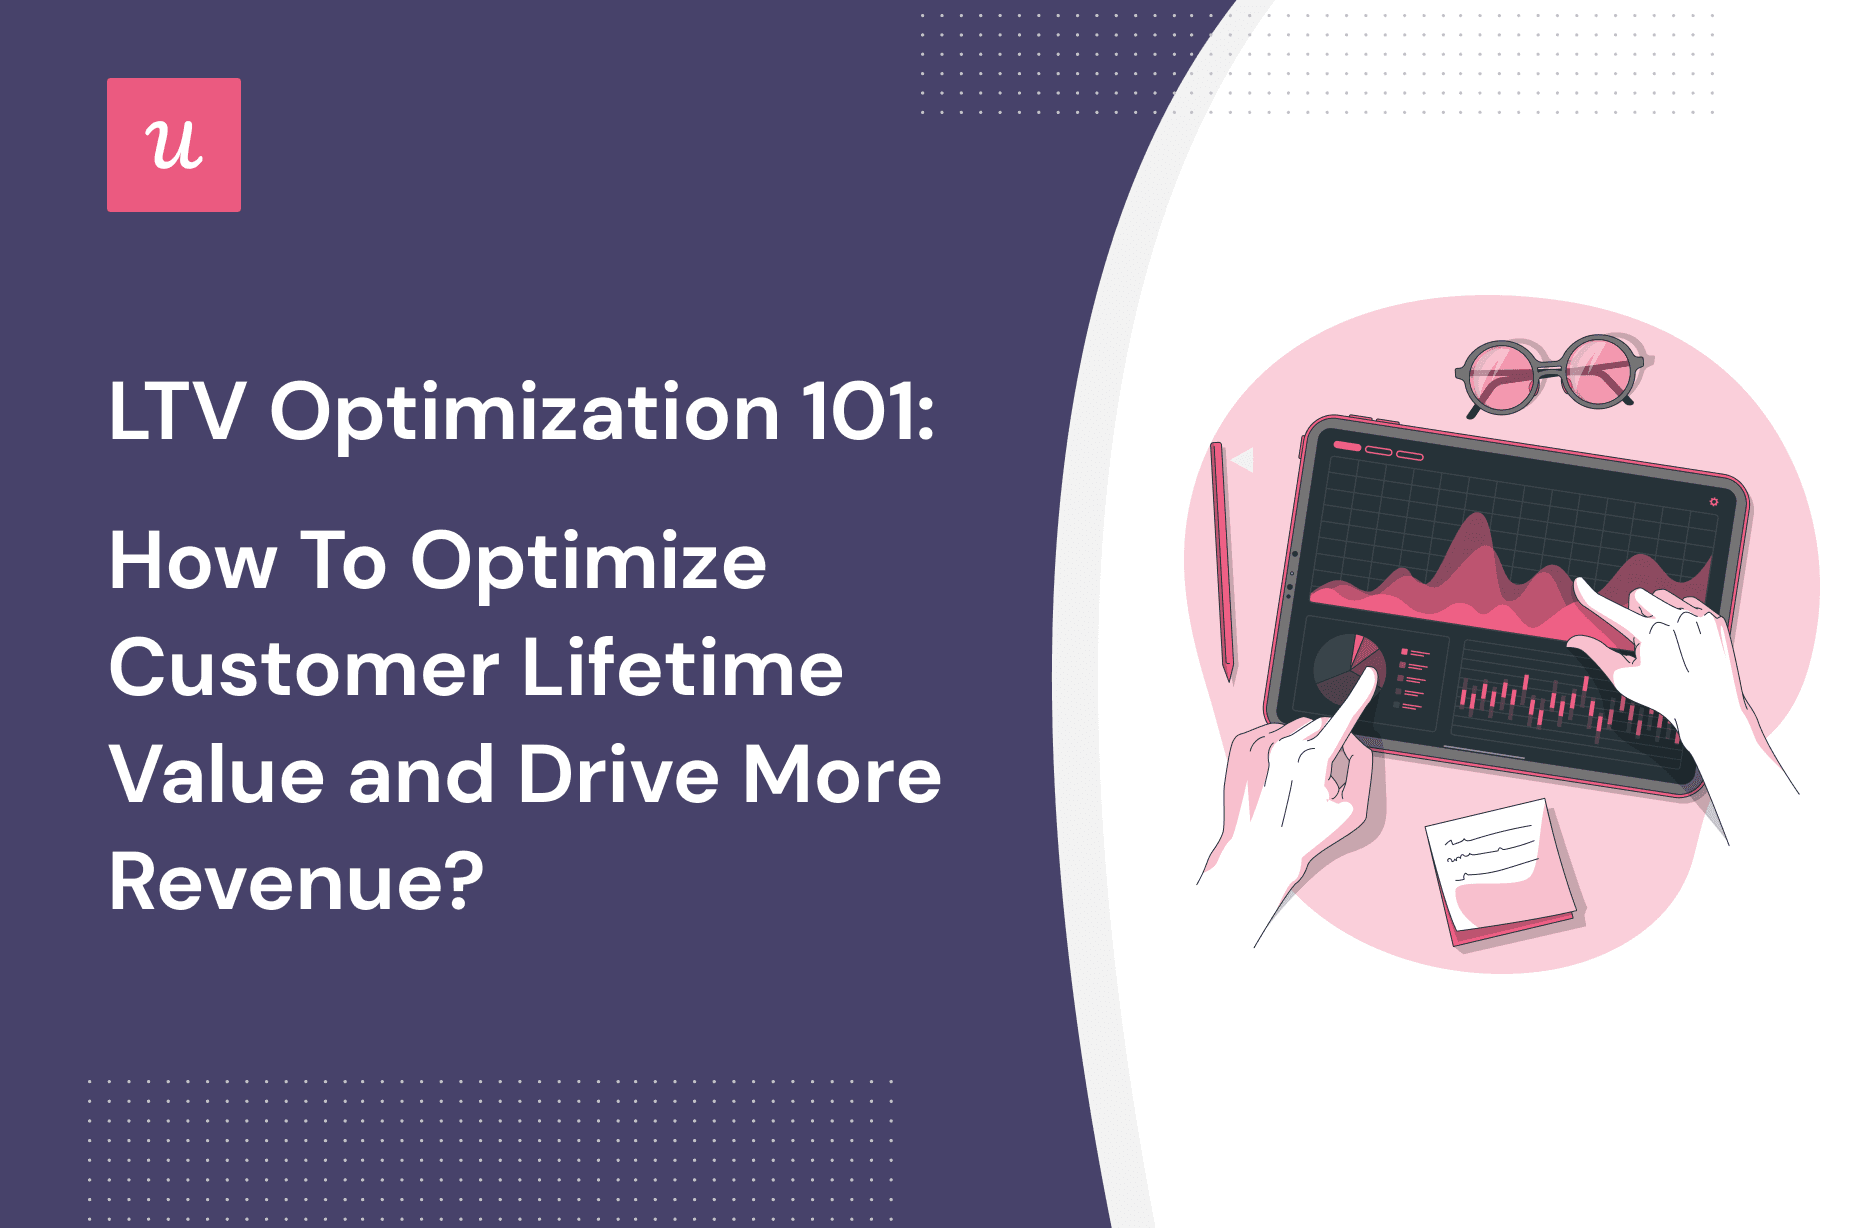 LTV Optimization 101: How To Optimize Customer Lifetime Value and Drive More Revenue? cover